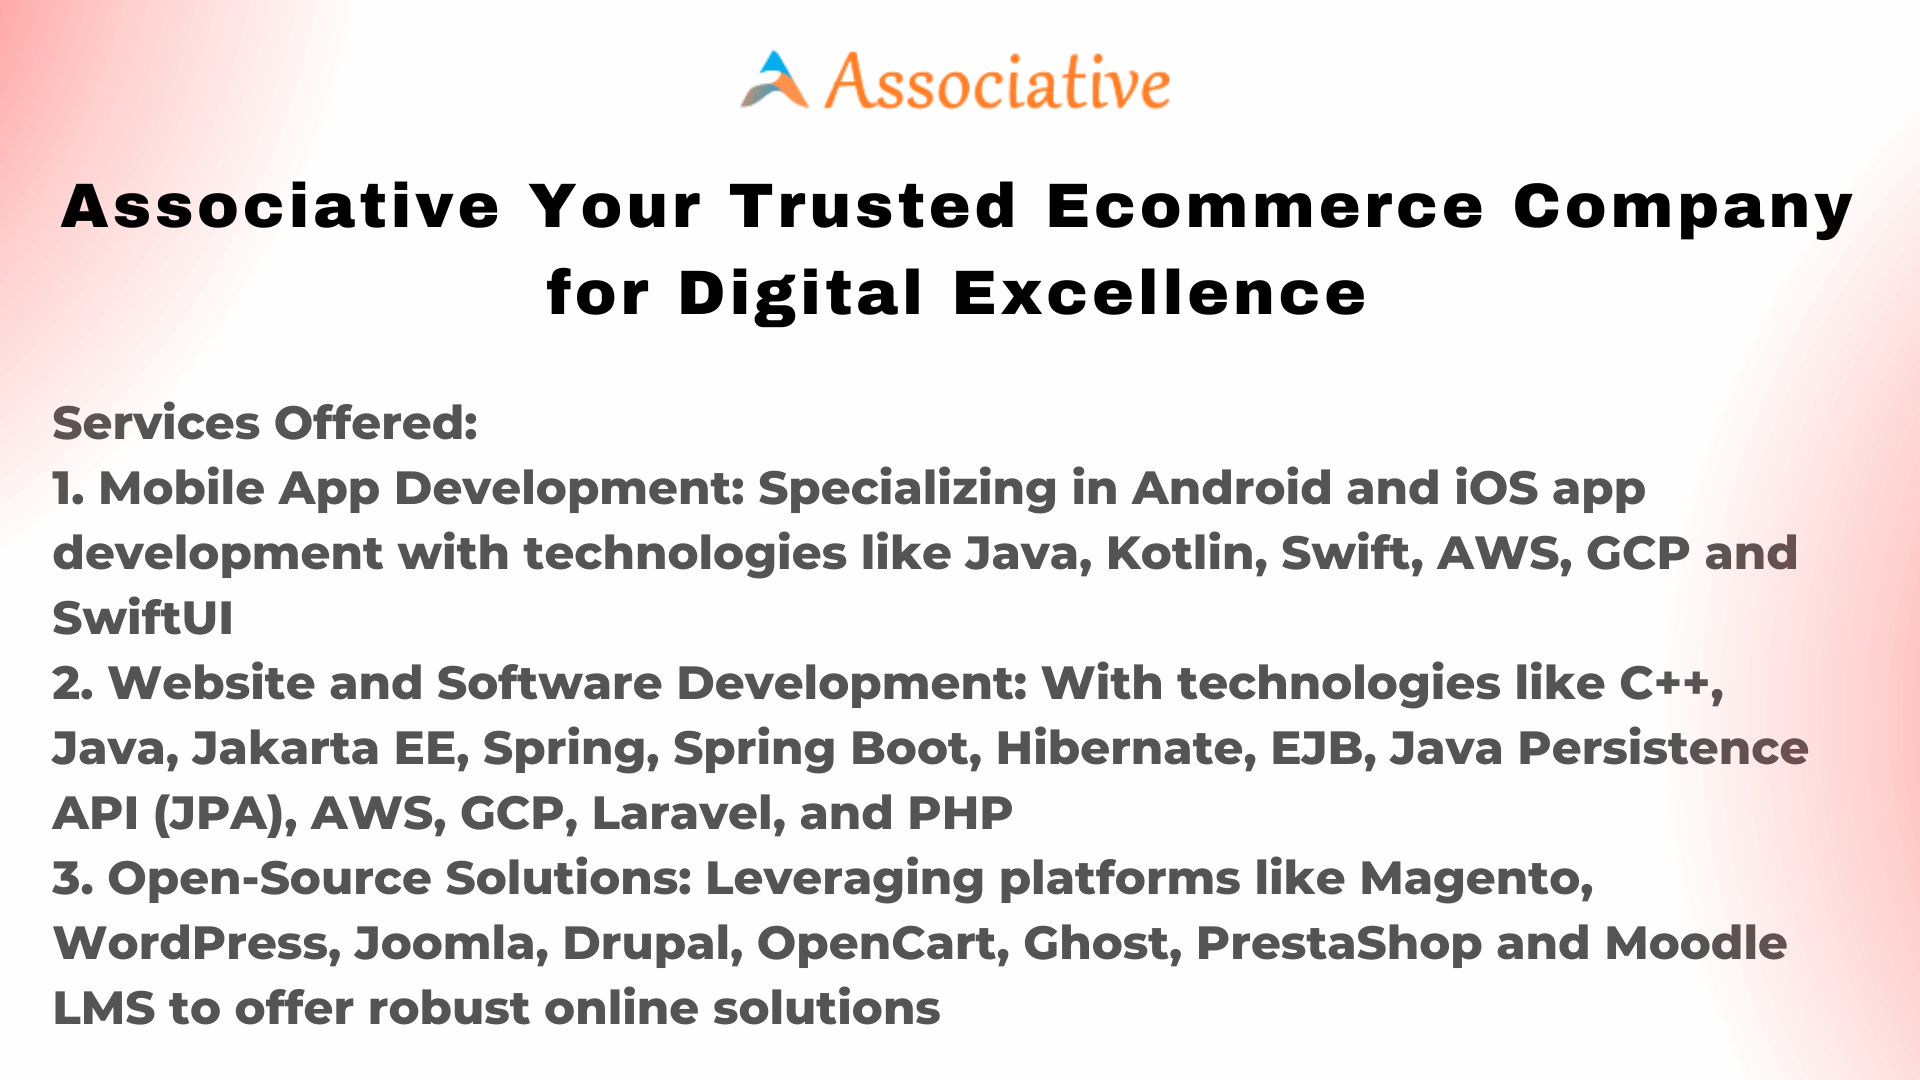 Associative Your Trusted Ecommerce Company for Digital Excellence